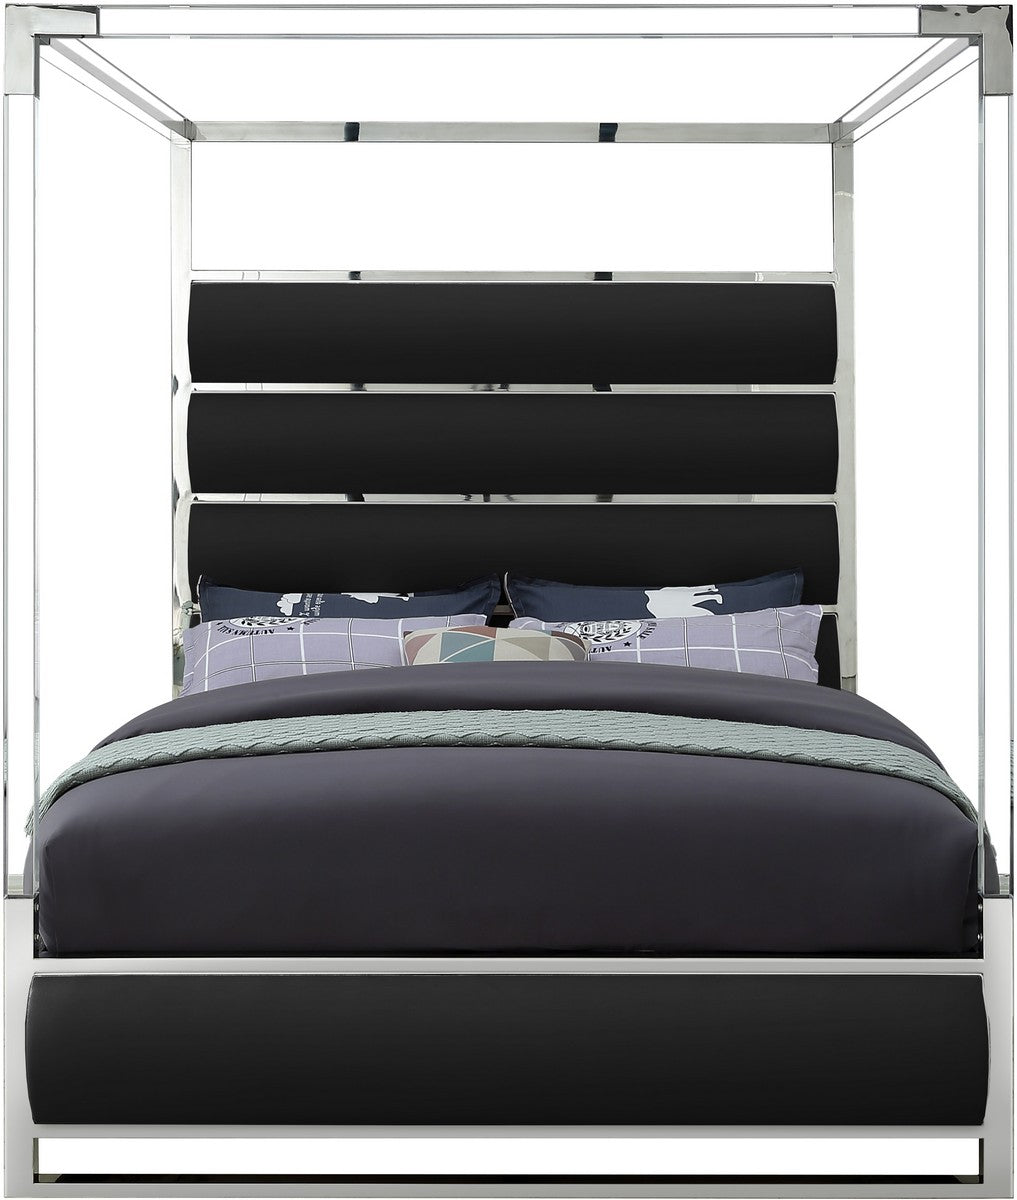 Meridian Furniture Encore Black Faux Leather King Bed (4 Boxes)